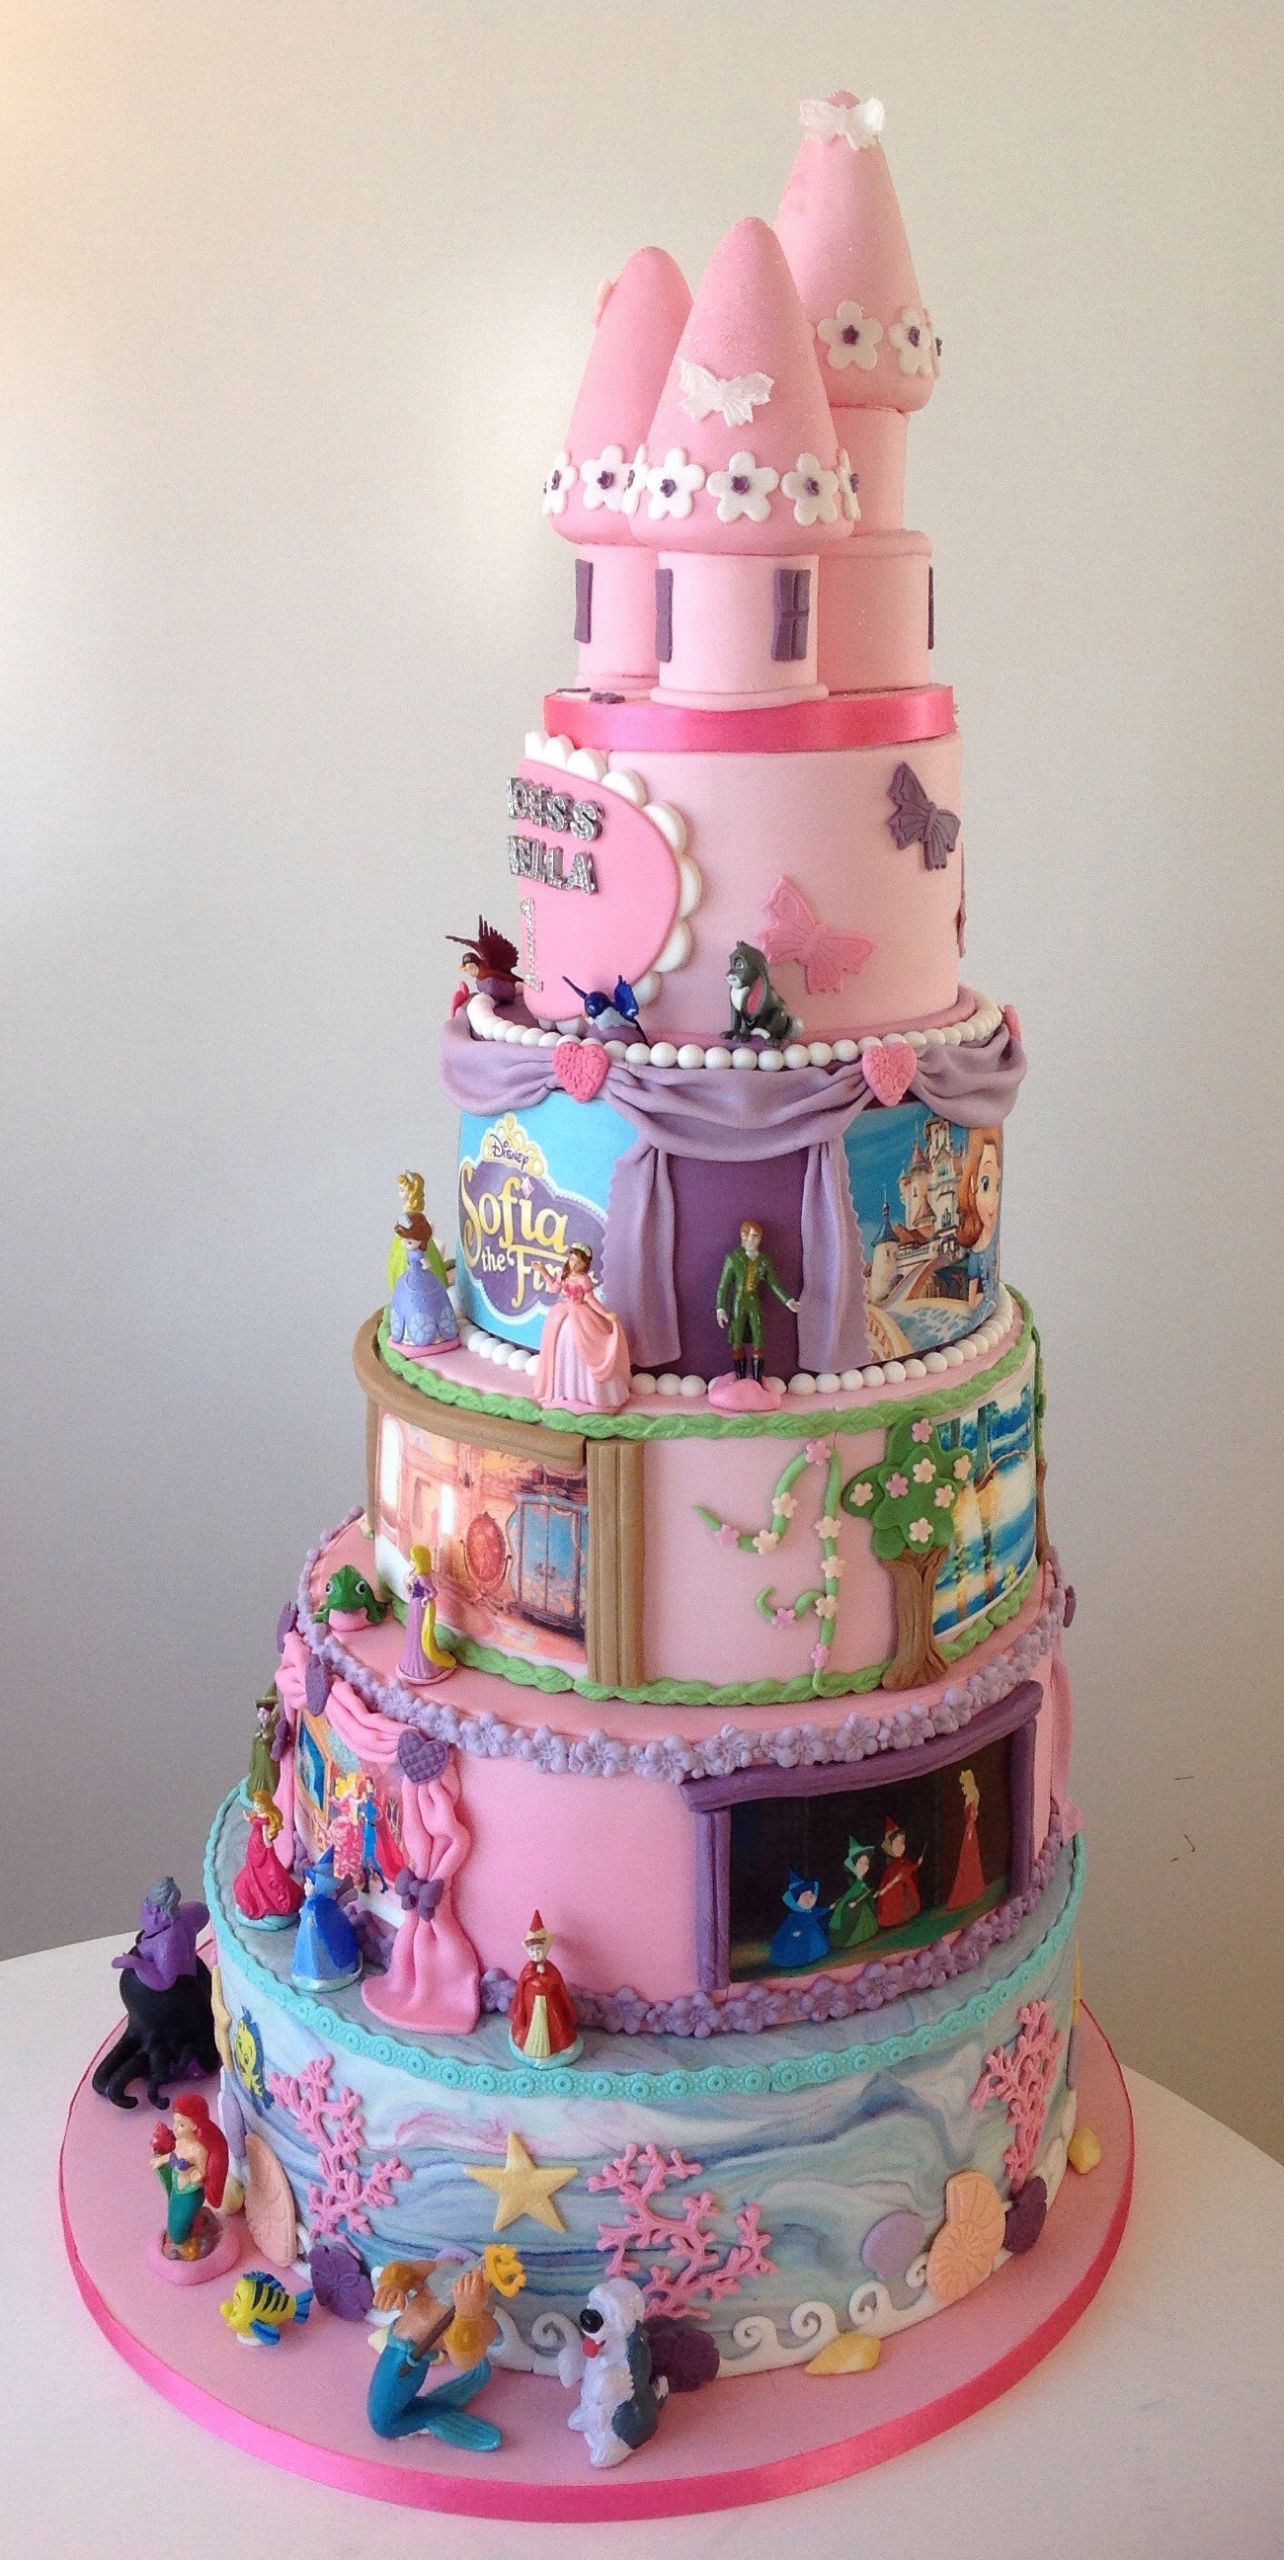 Pictures Of Birthday Cakes
 Disney Princess 1St Birthday Cake CakeCentral